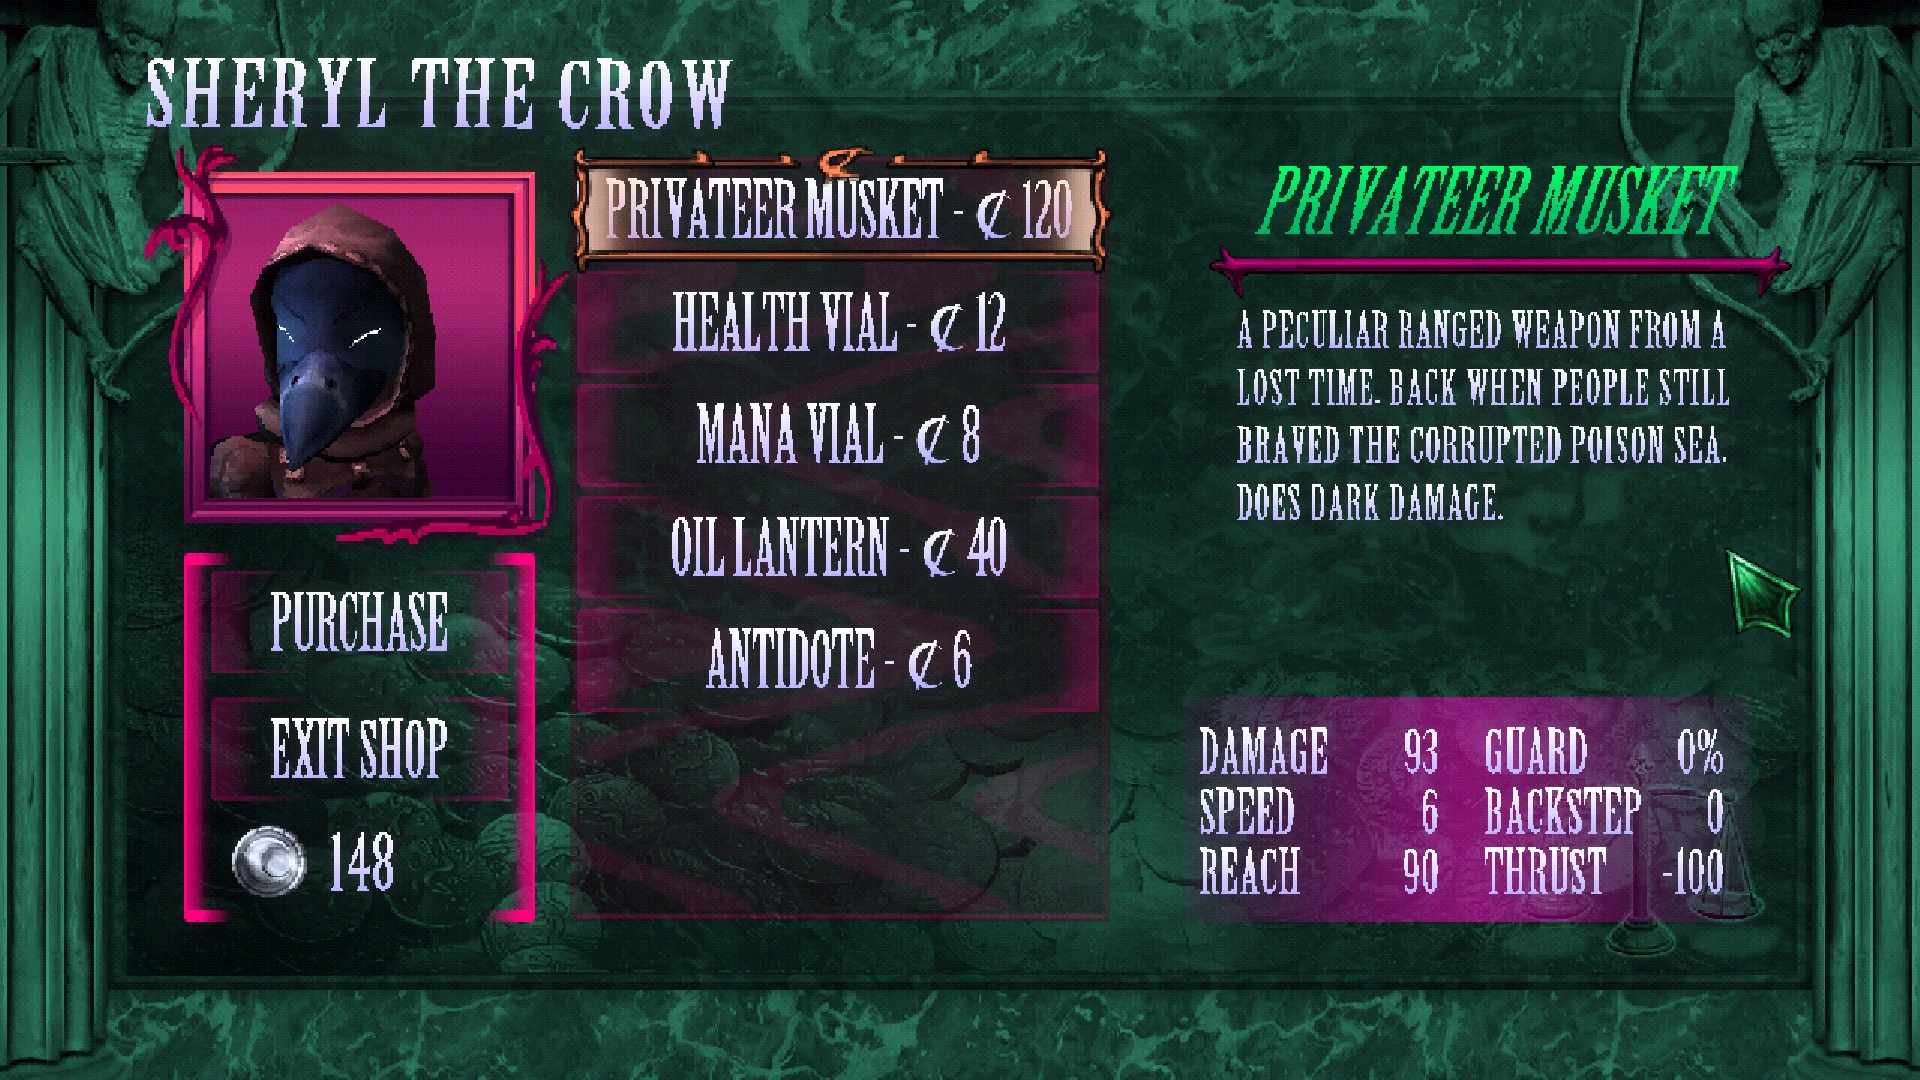 An image of Sheryl the Crow's shop interface.